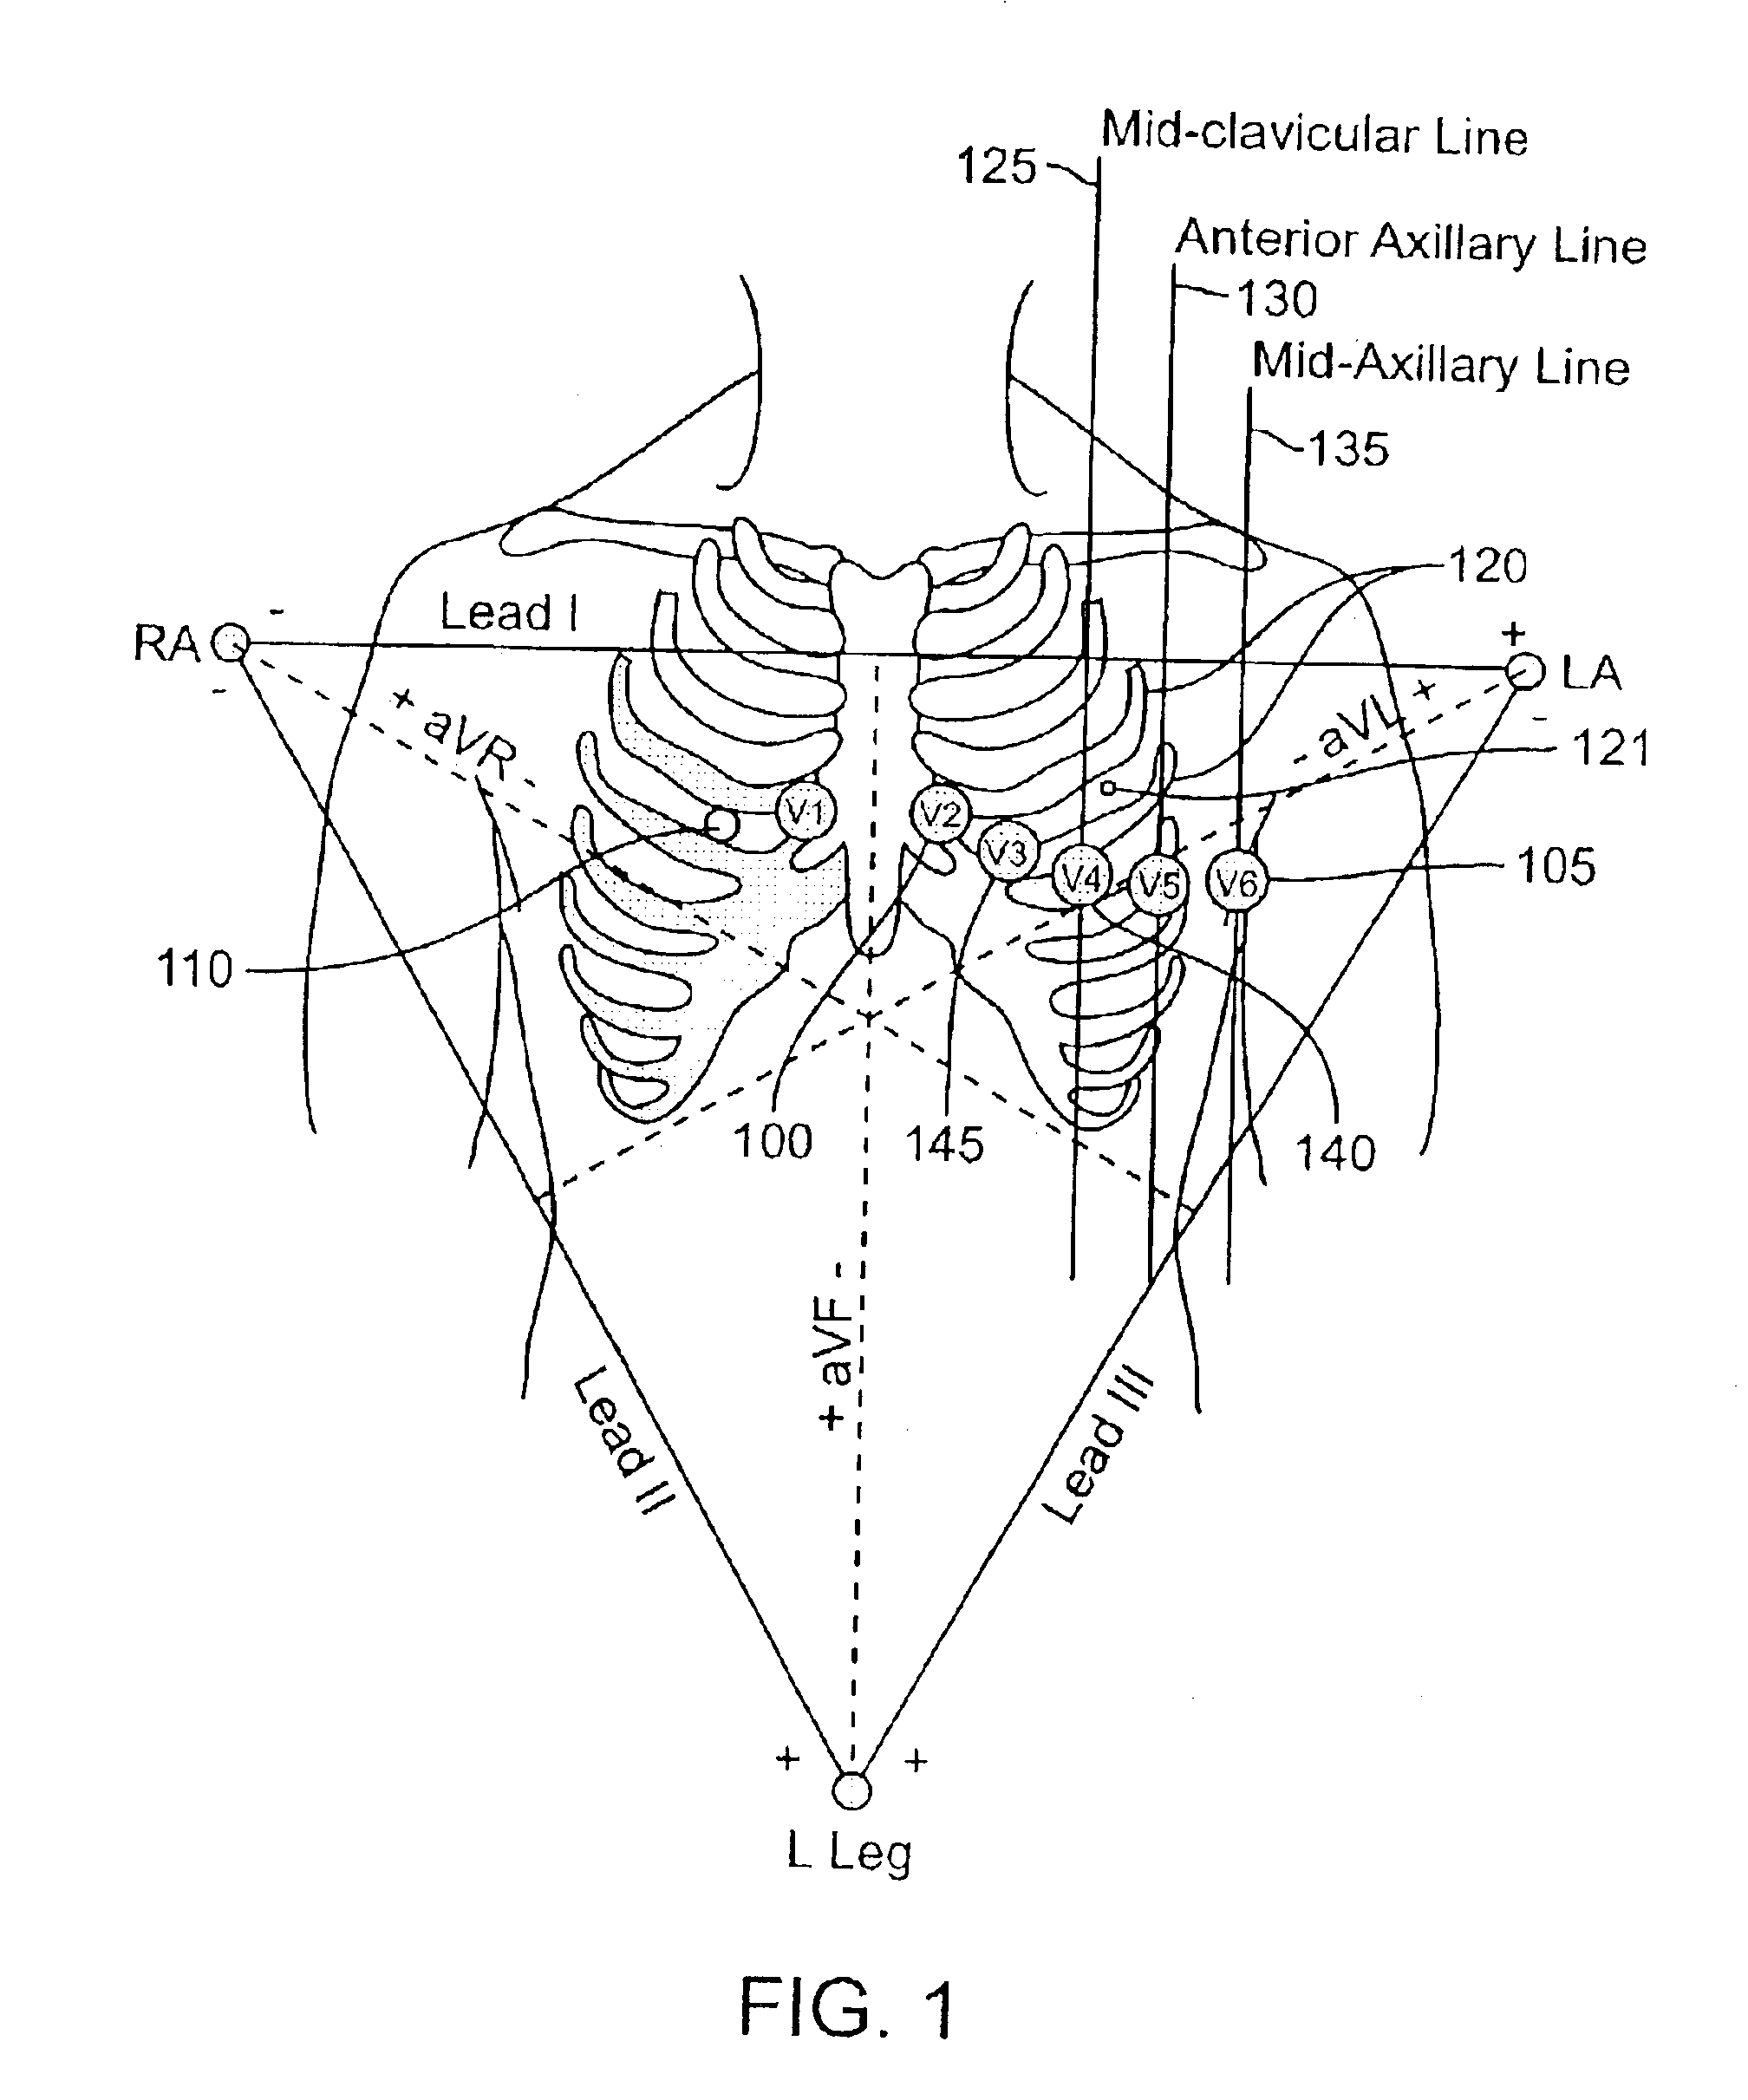 Method and apparatus for determining metabolic factors from an electrocardiogram